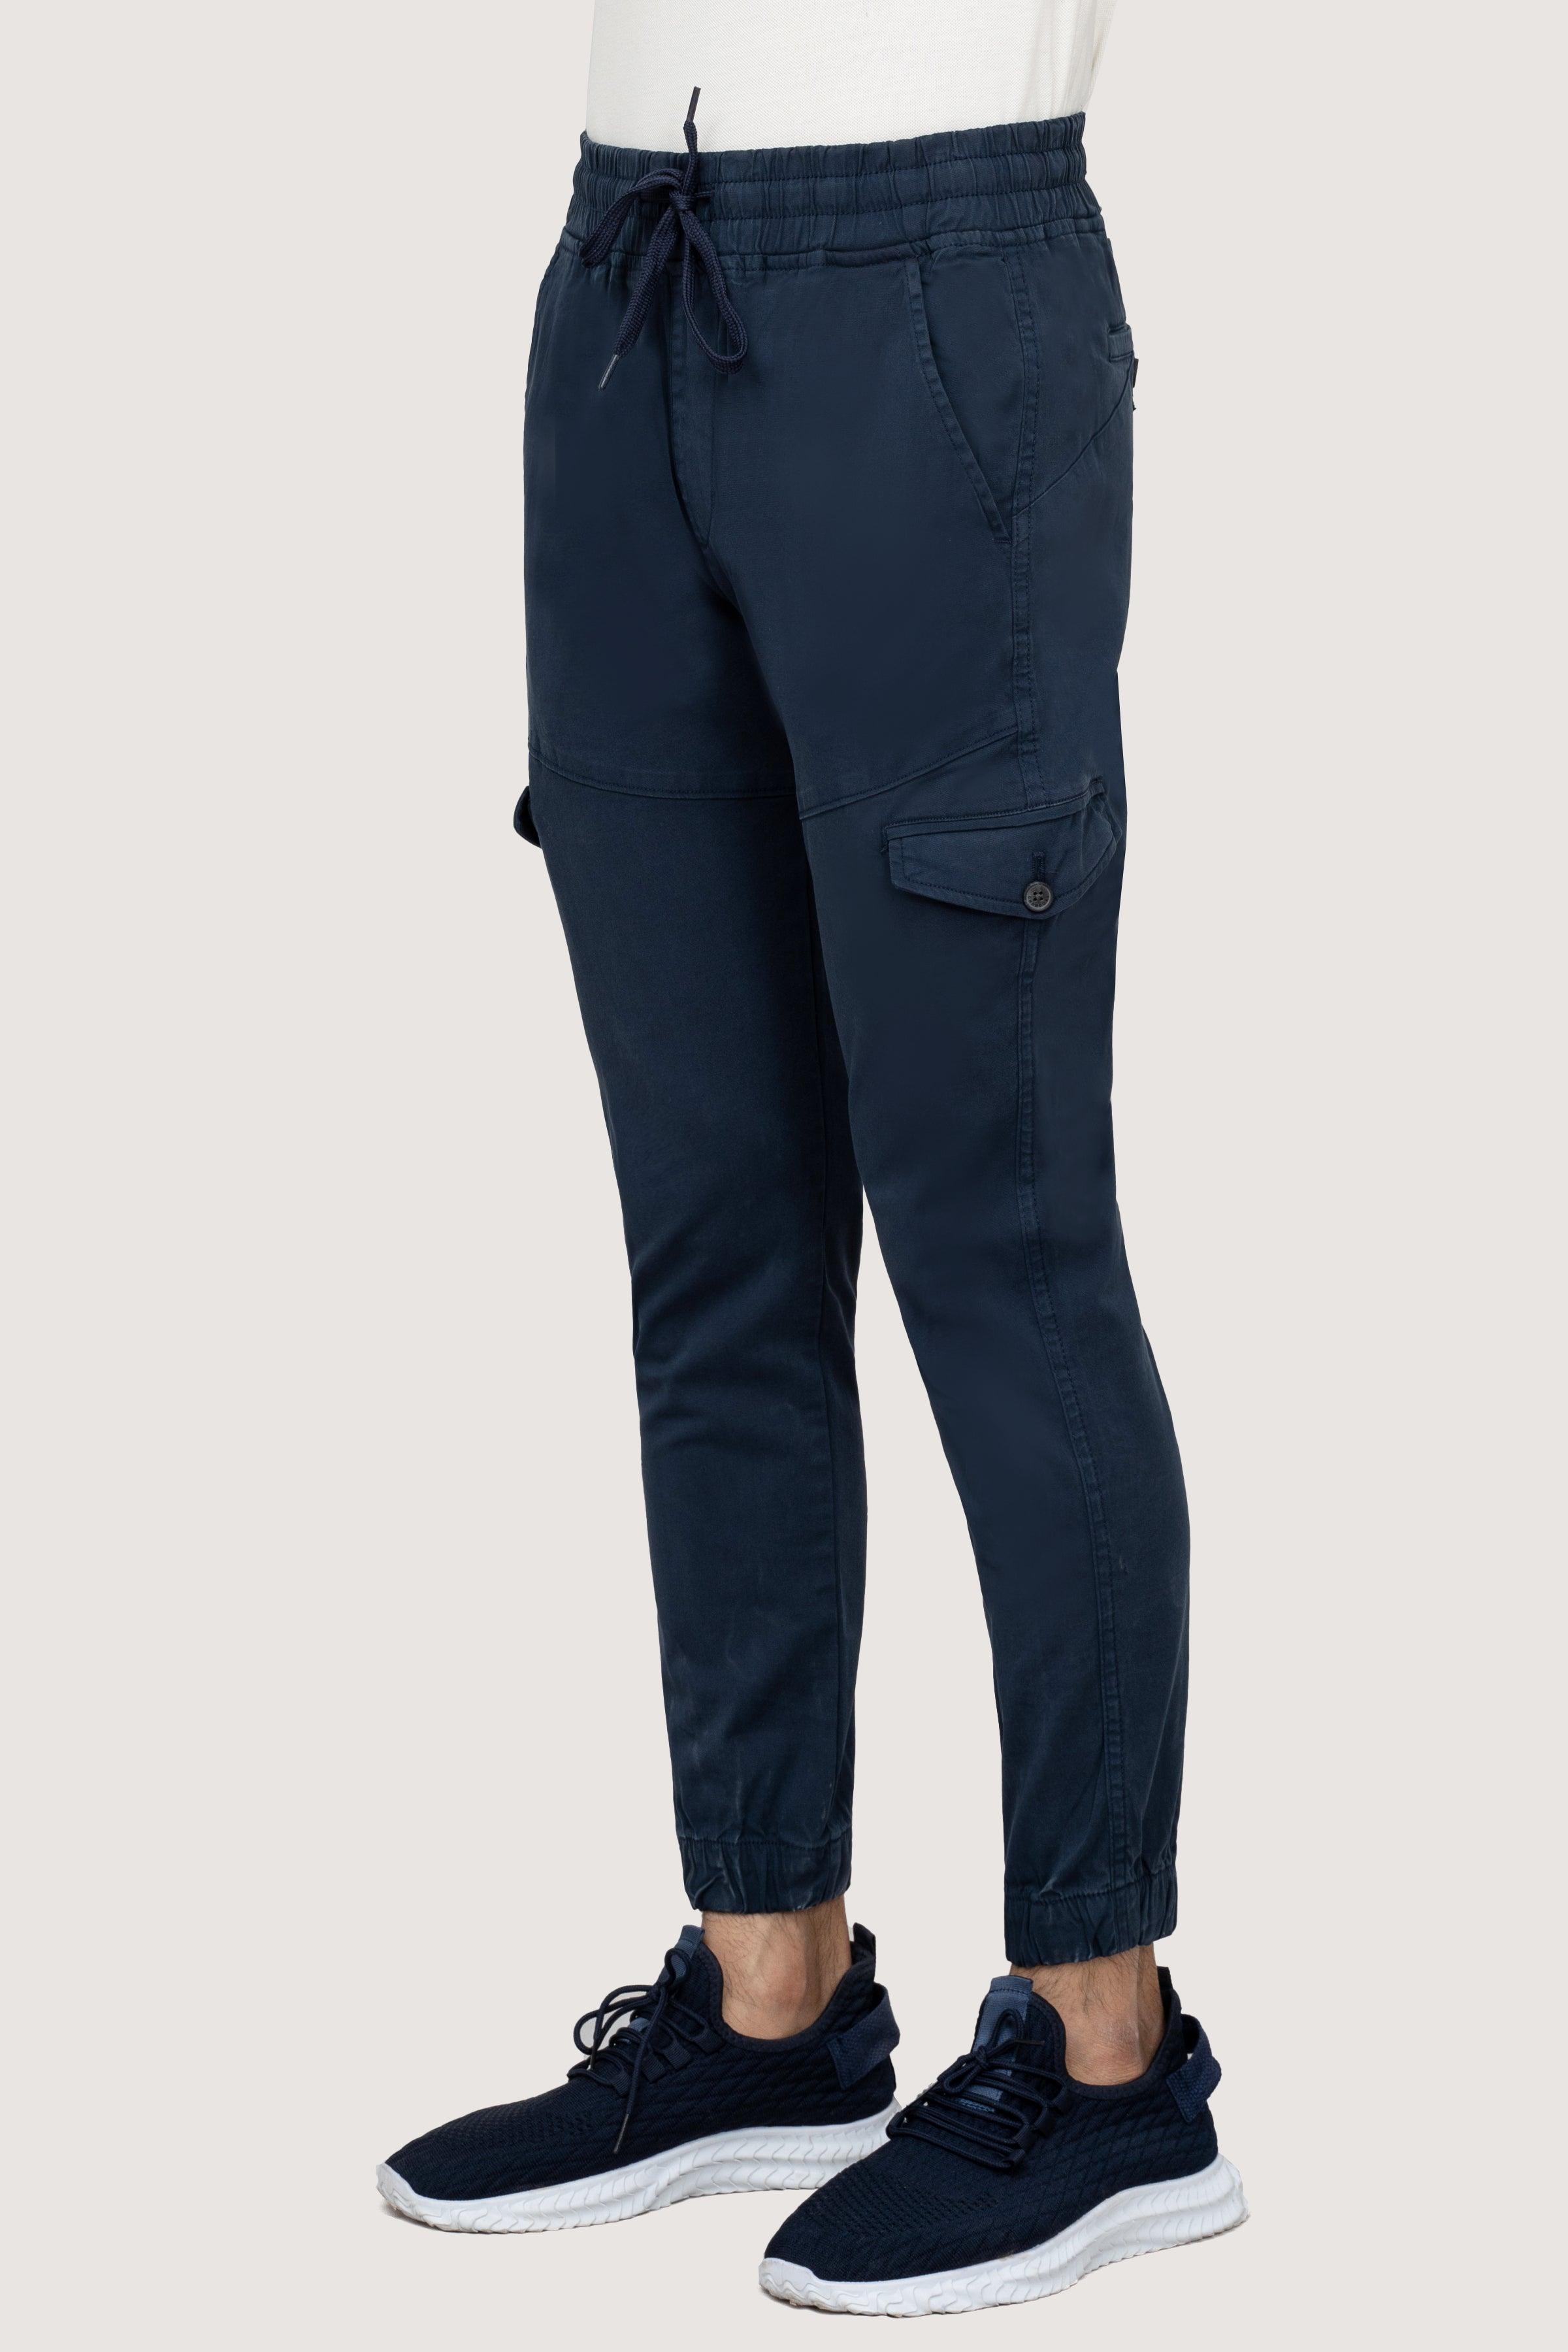 CASUAL JOGGER SLIMFIT TROUSER NAVY at Charcoal Clothing